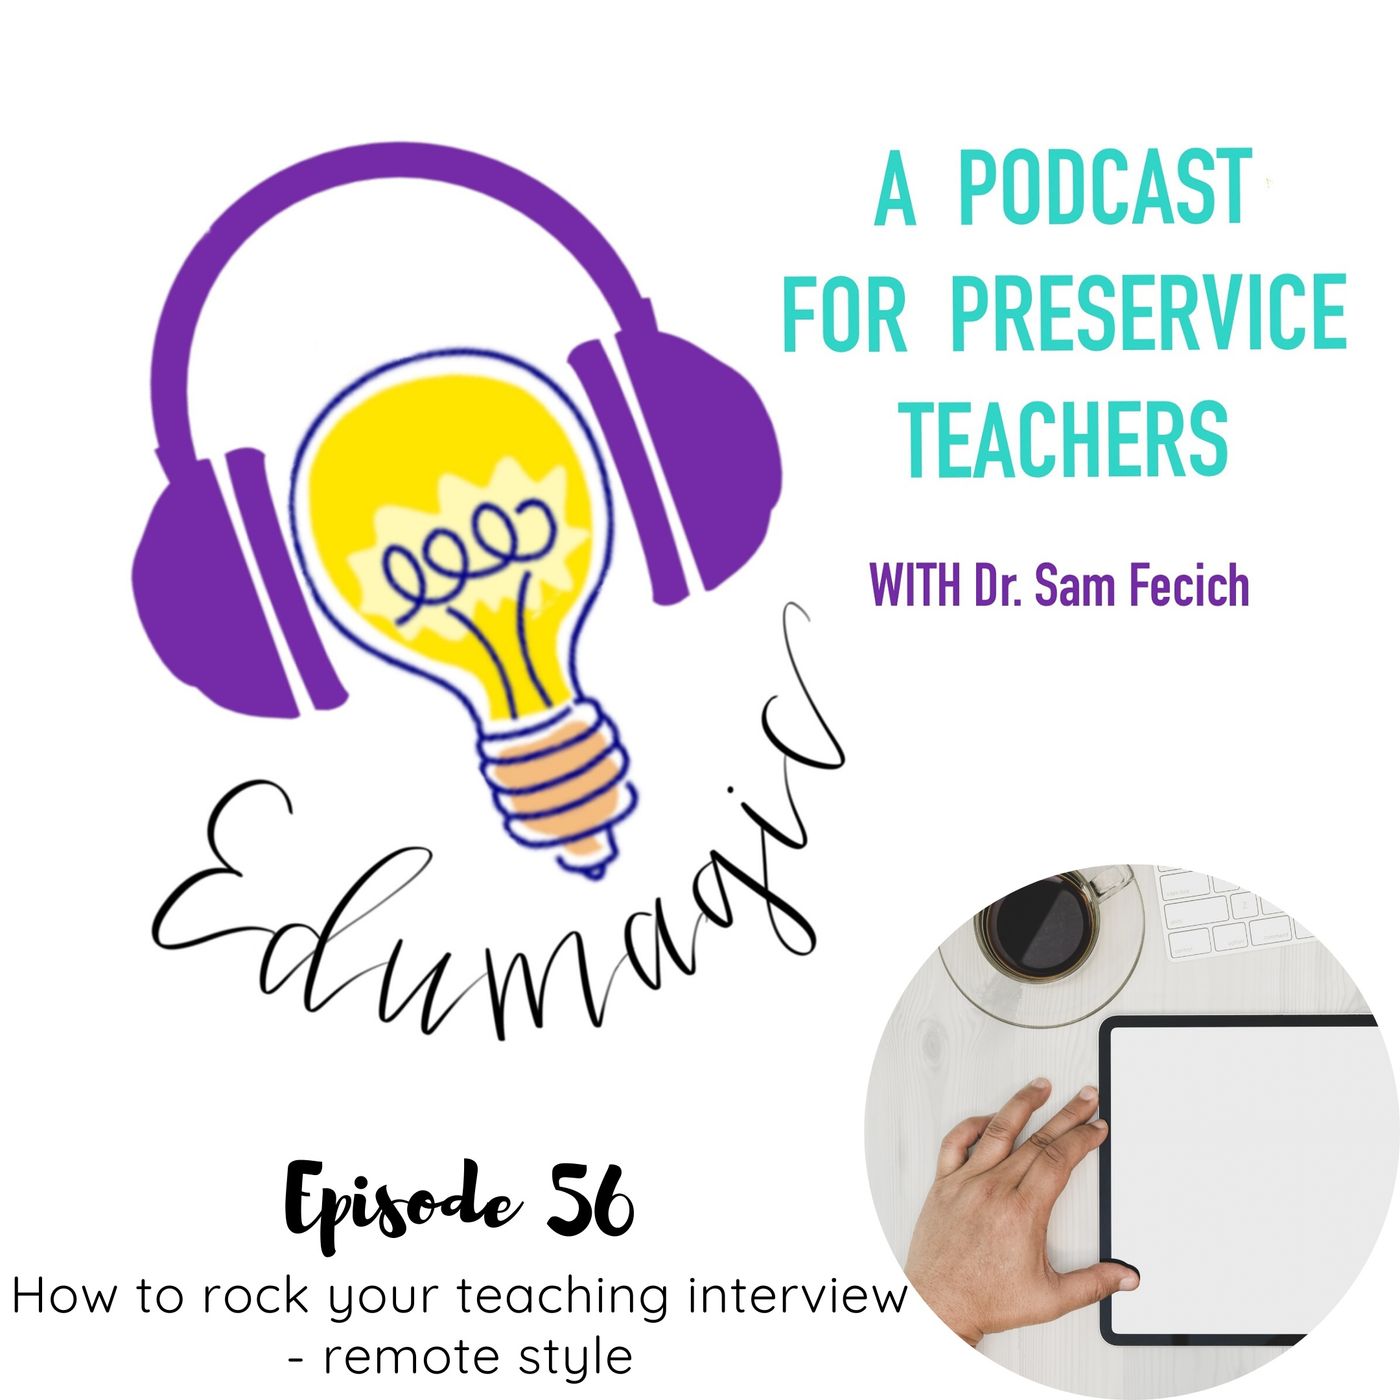 How to rock your teaching interview - remote style 56 Image